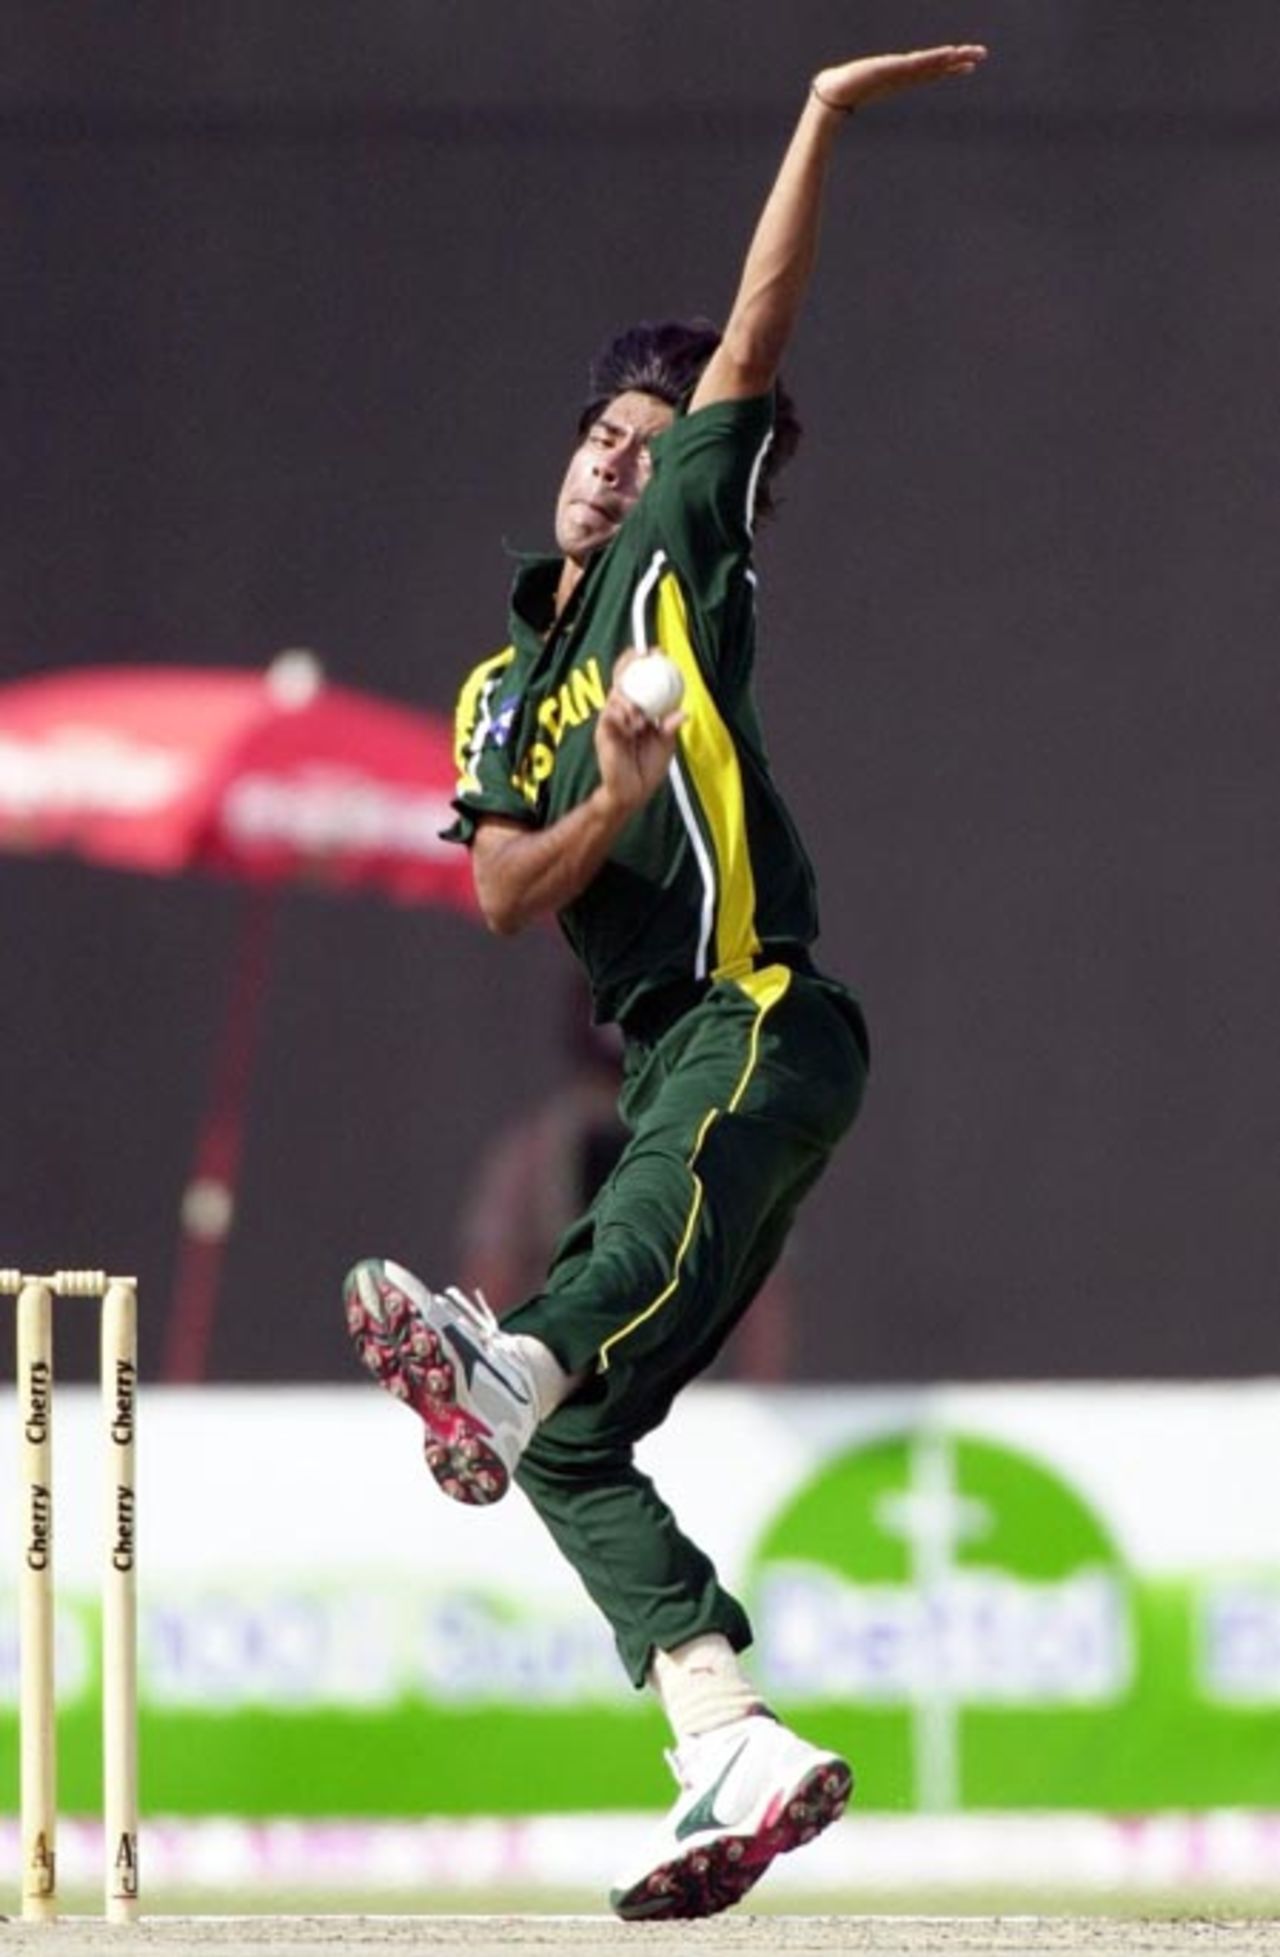 Pakistani pacer Mohammad Sami bowls during his first spell against Zimbabwe during the final match of the Four Nation Sharjah Cricket Tournament, 10 April 2003.